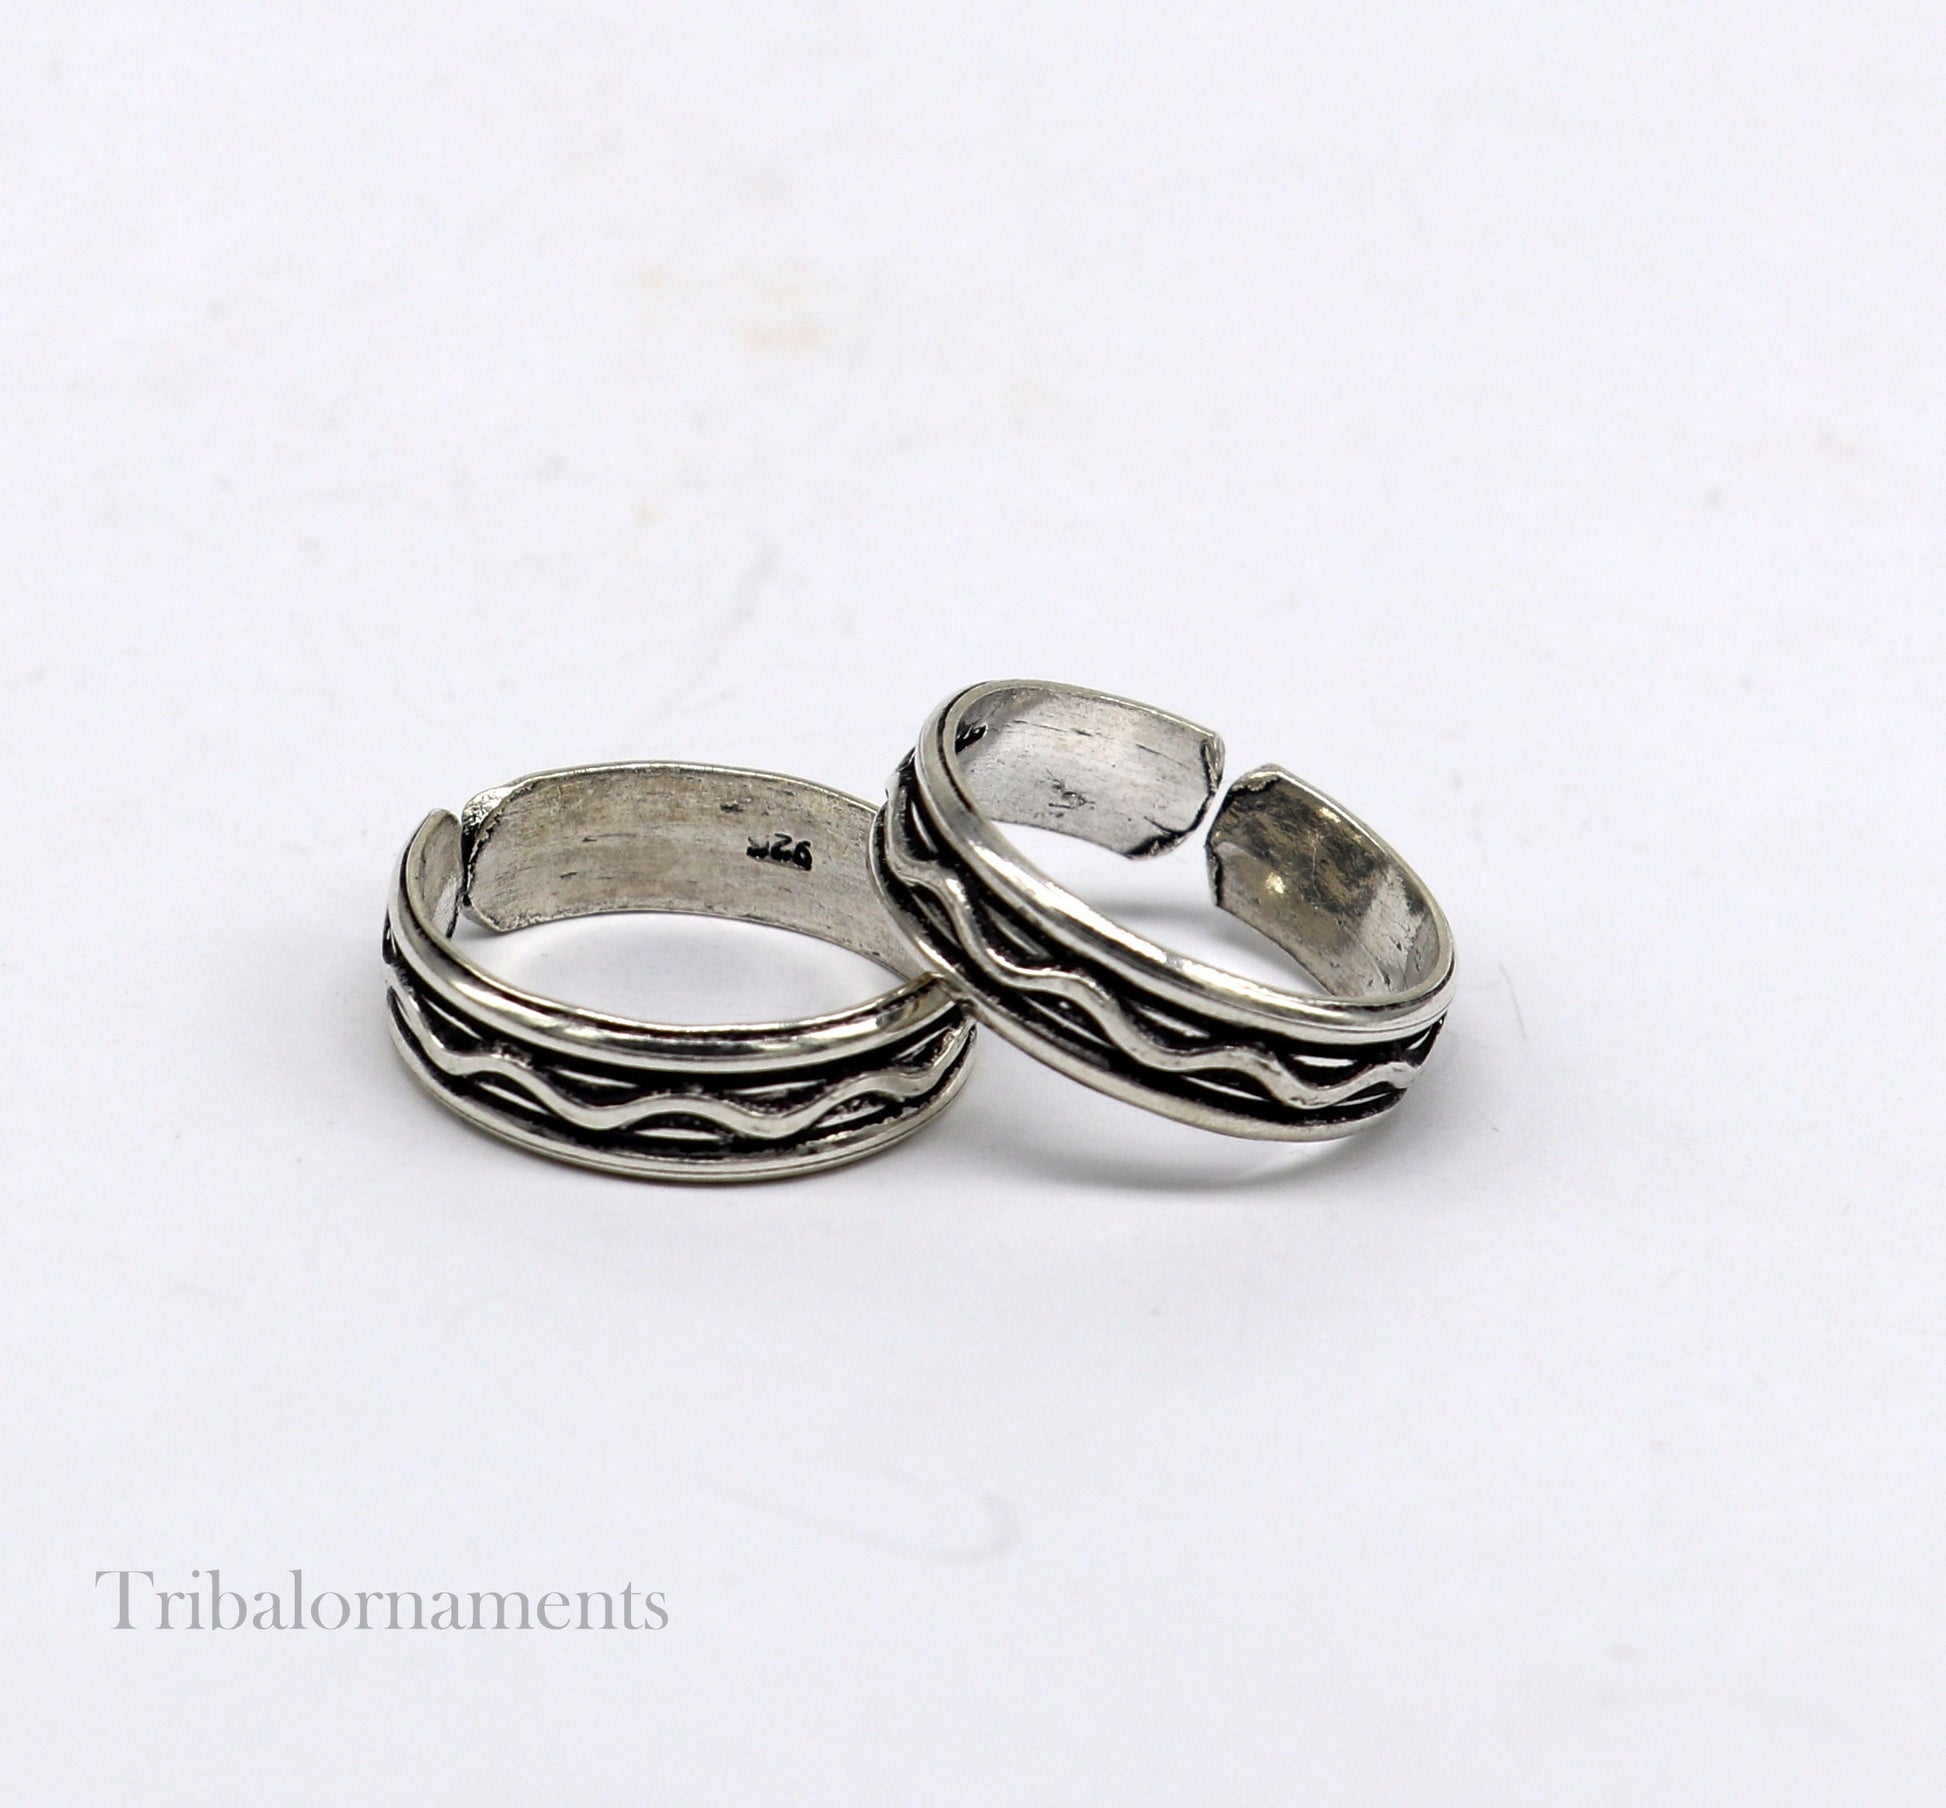 92.5 sterling silver handmade elegant design solid 5mm toe ring band, toe band stylish modern women's brides jewelry from india toer108 - TRIBAL ORNAMENTS